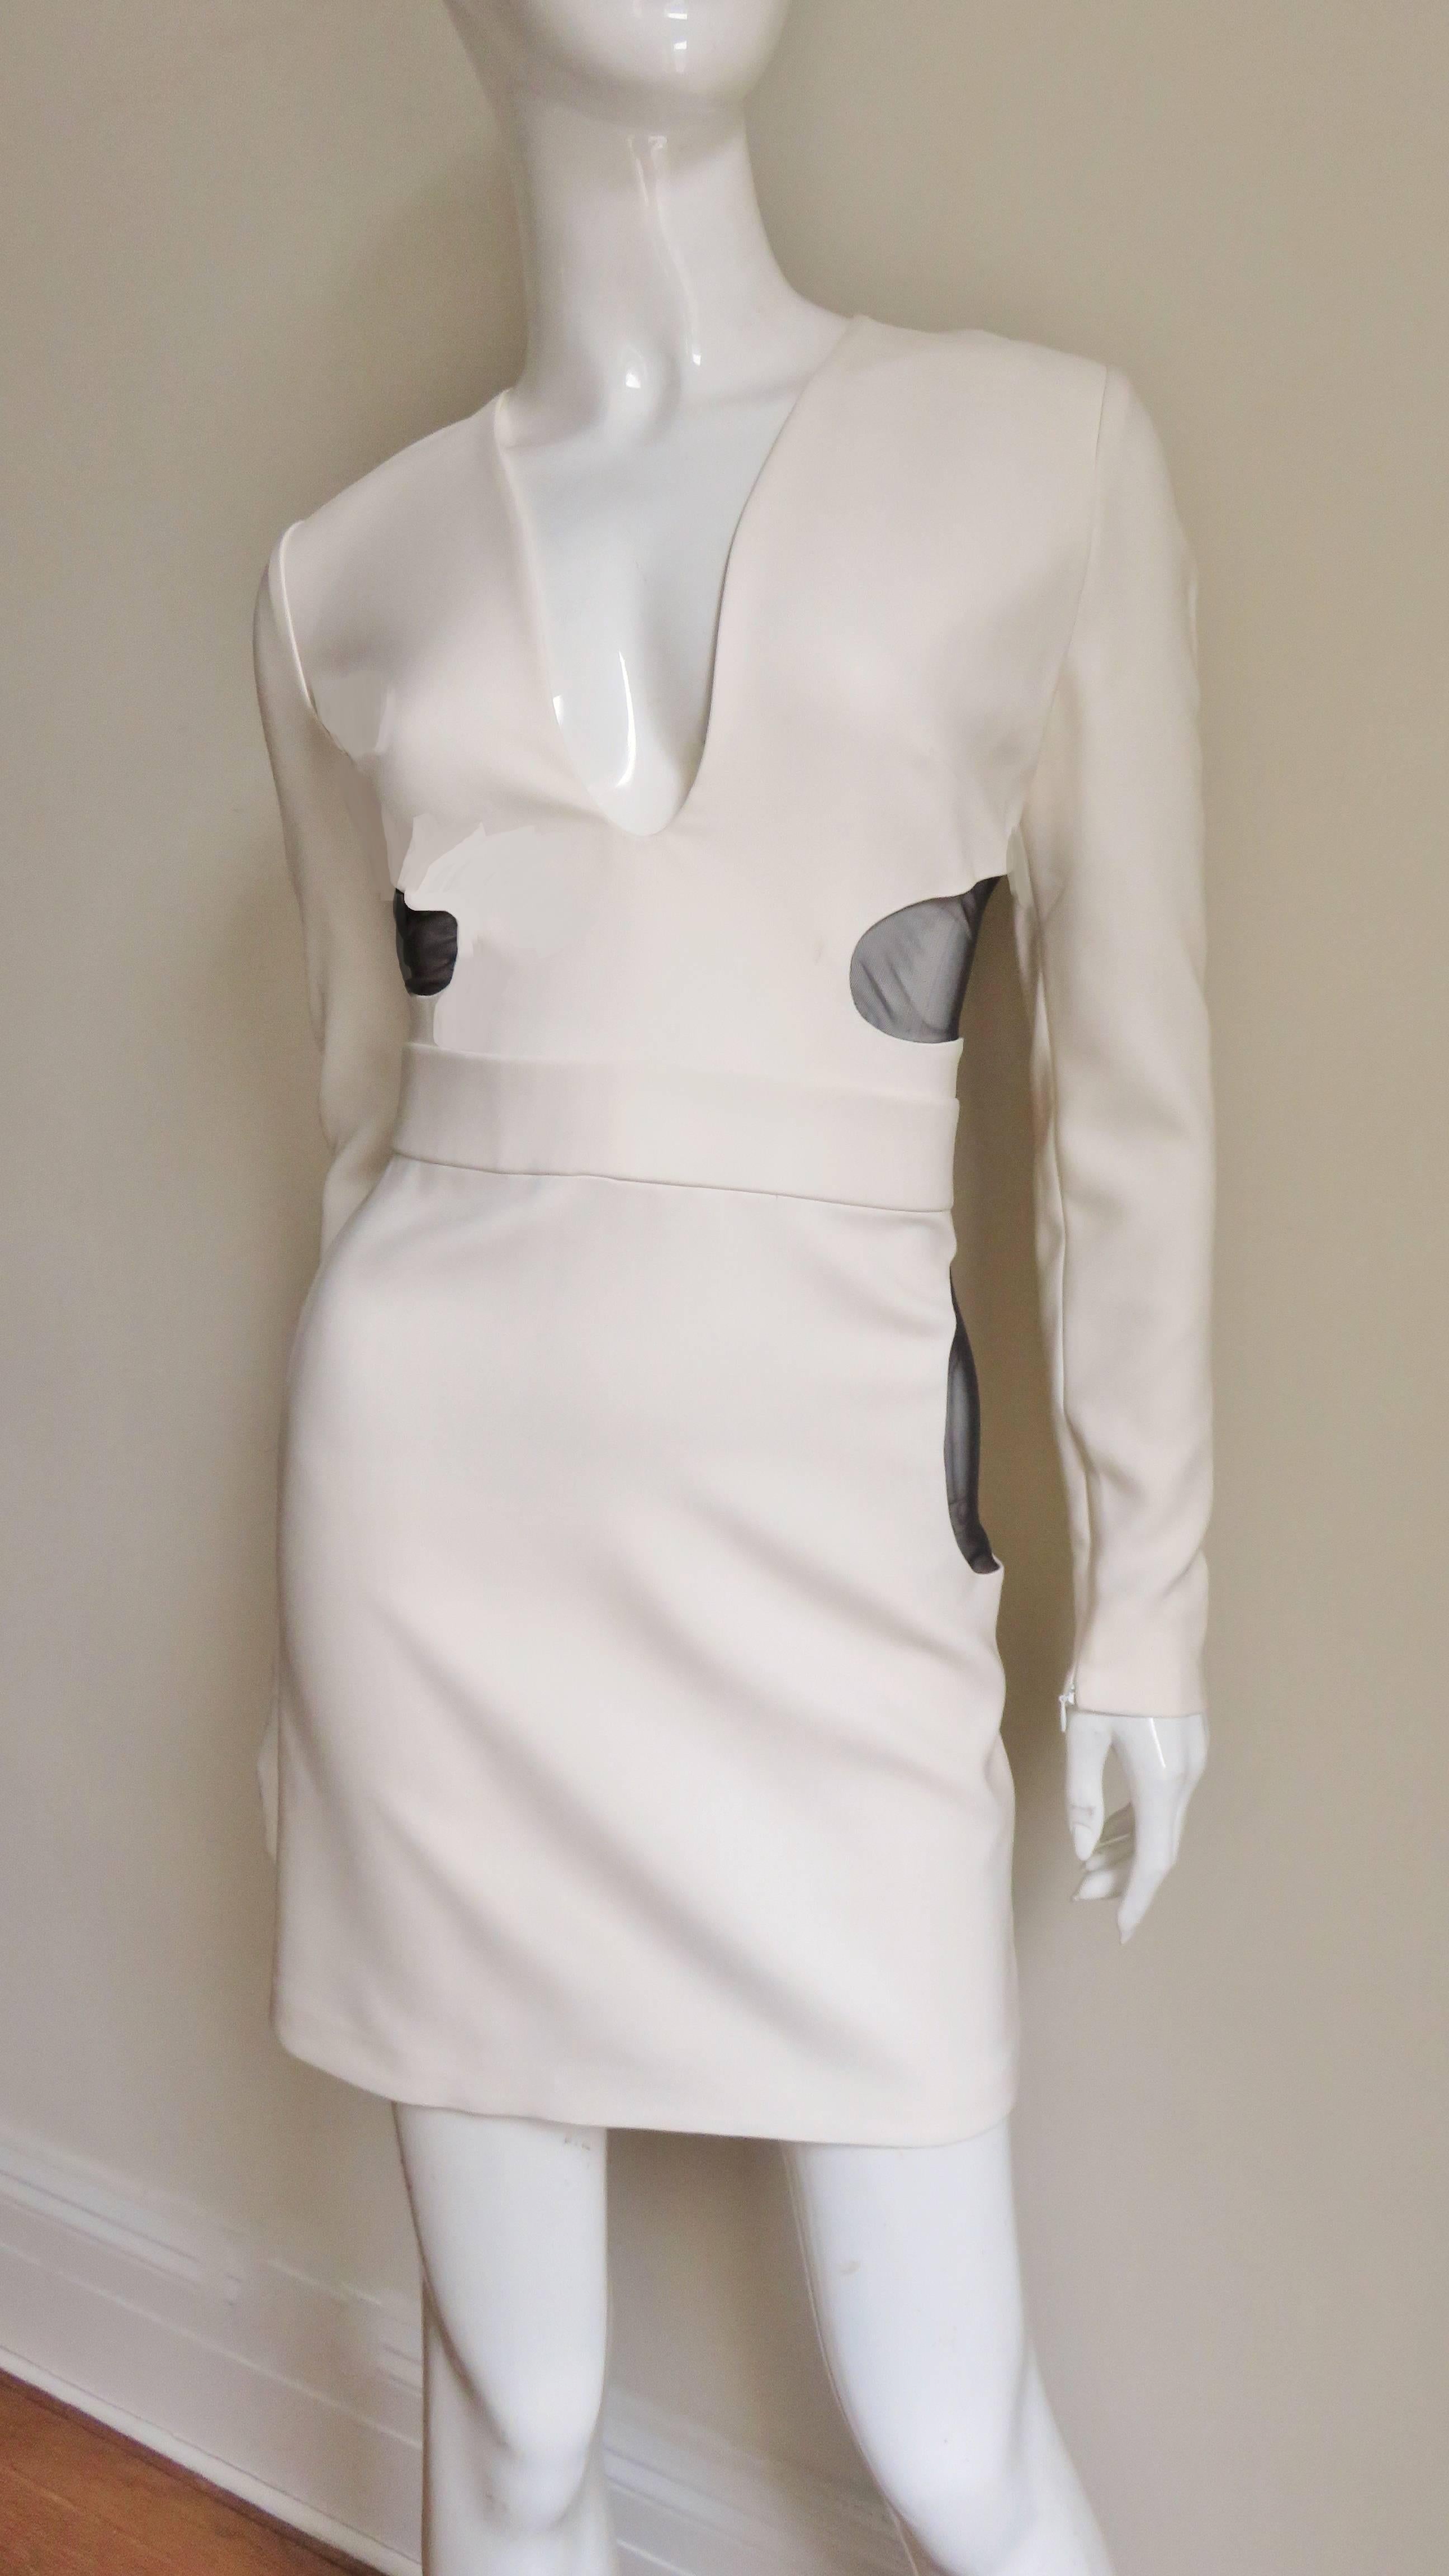 Tom Ford New Plunge Dress with Cut outs In Excellent Condition For Sale In Water Mill, NY